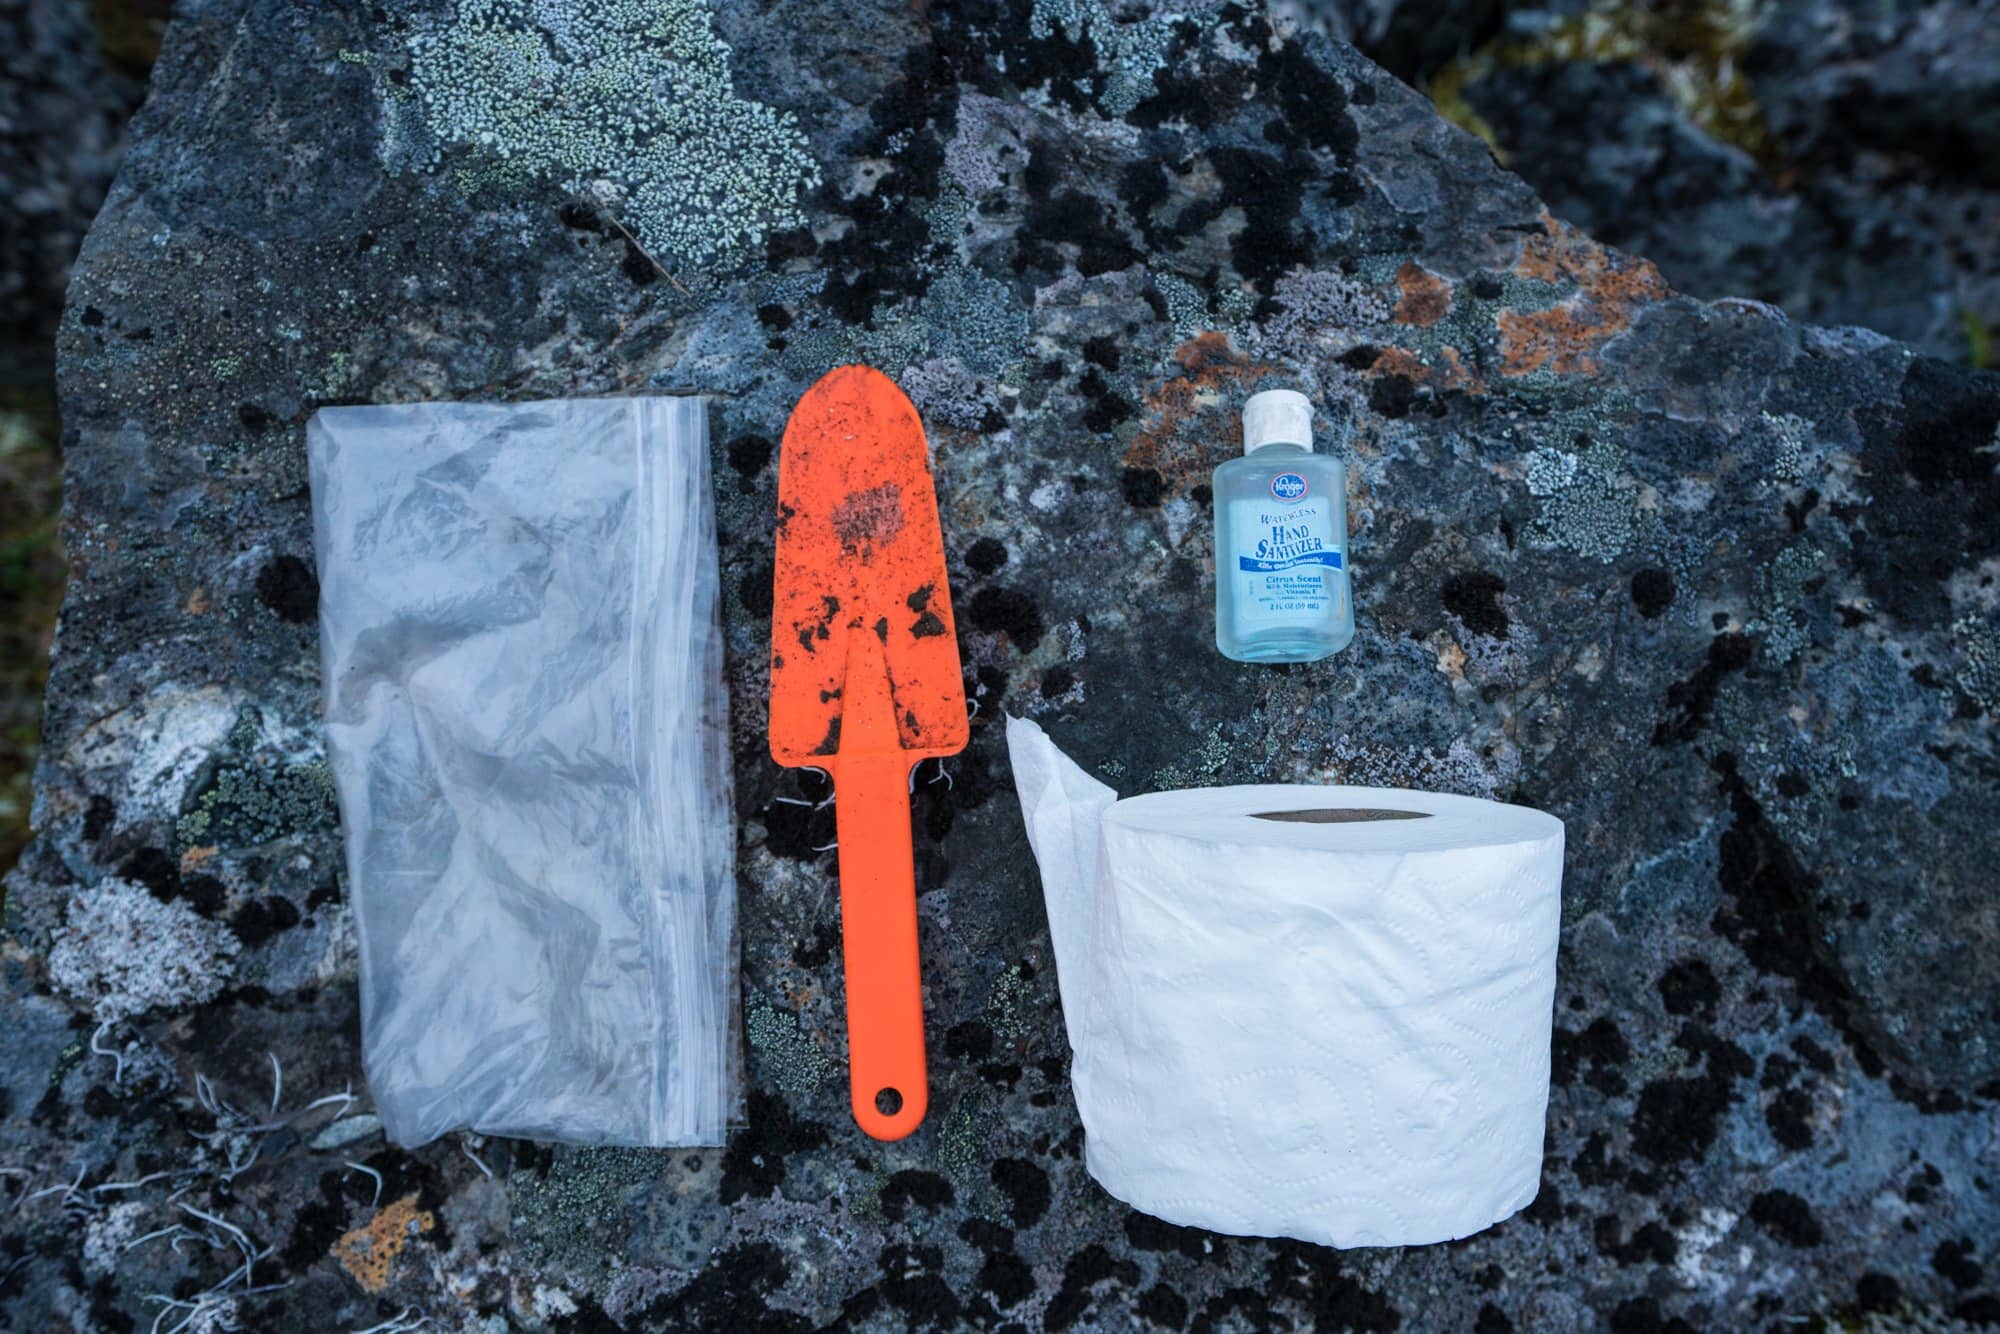 Backcountry poop kit // Learn the best tips for staying clean while camping including hygiene essentials, camping on your period, how to poop outdoors, and more!